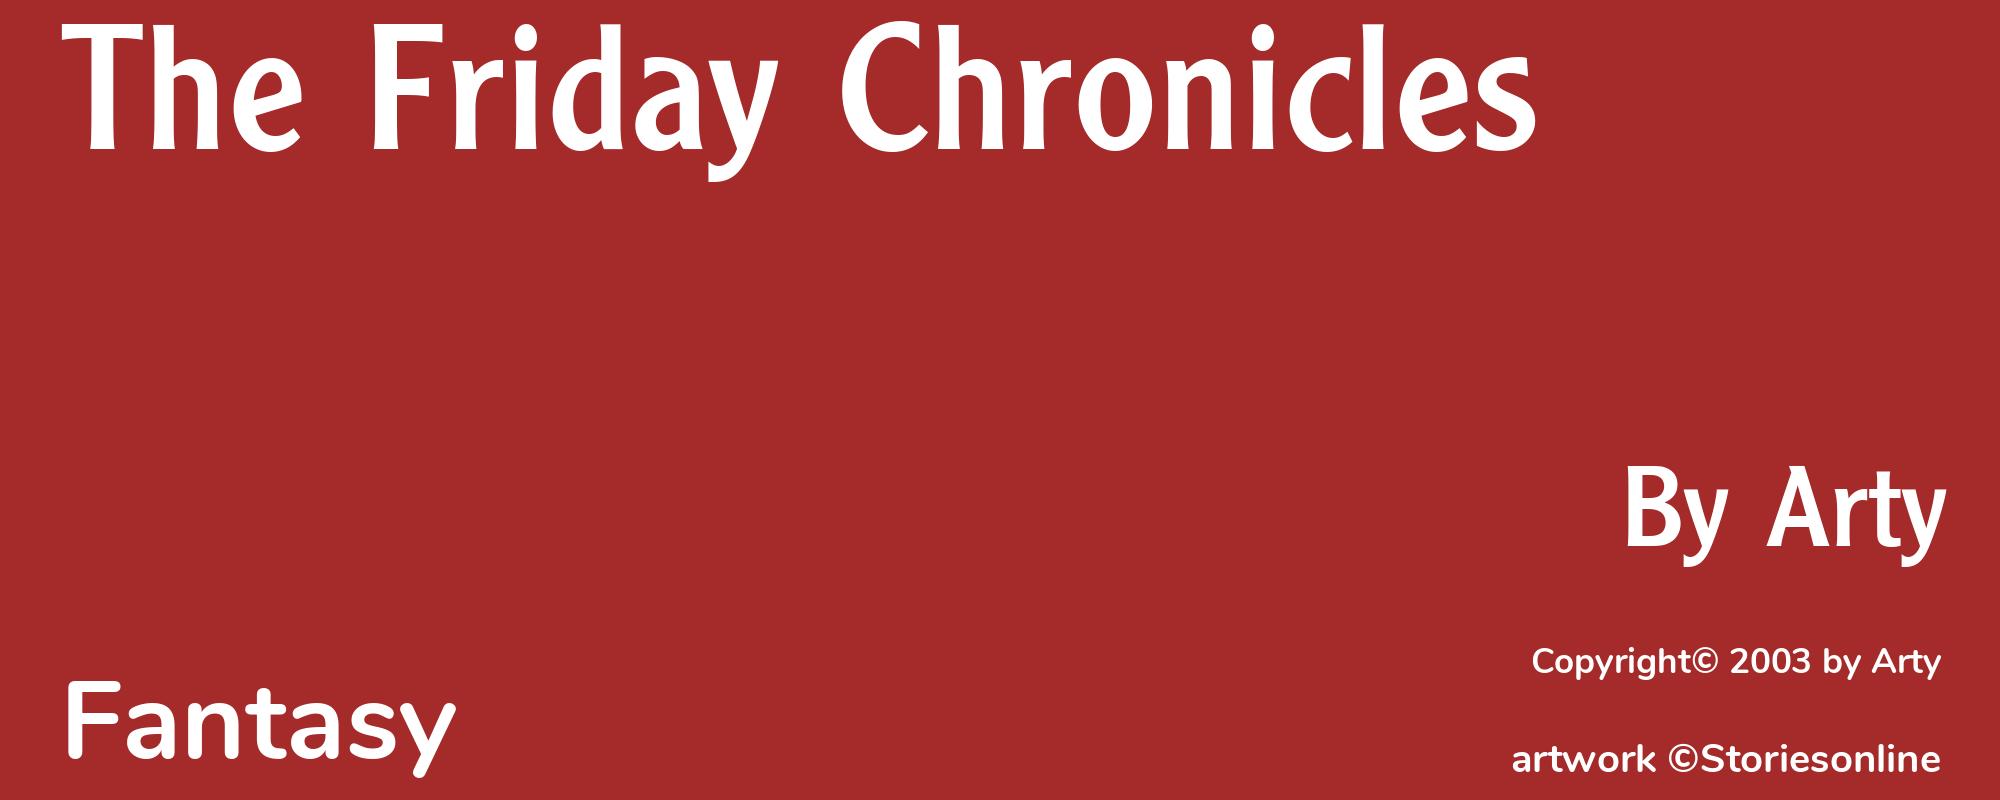 The Friday Chronicles - Cover